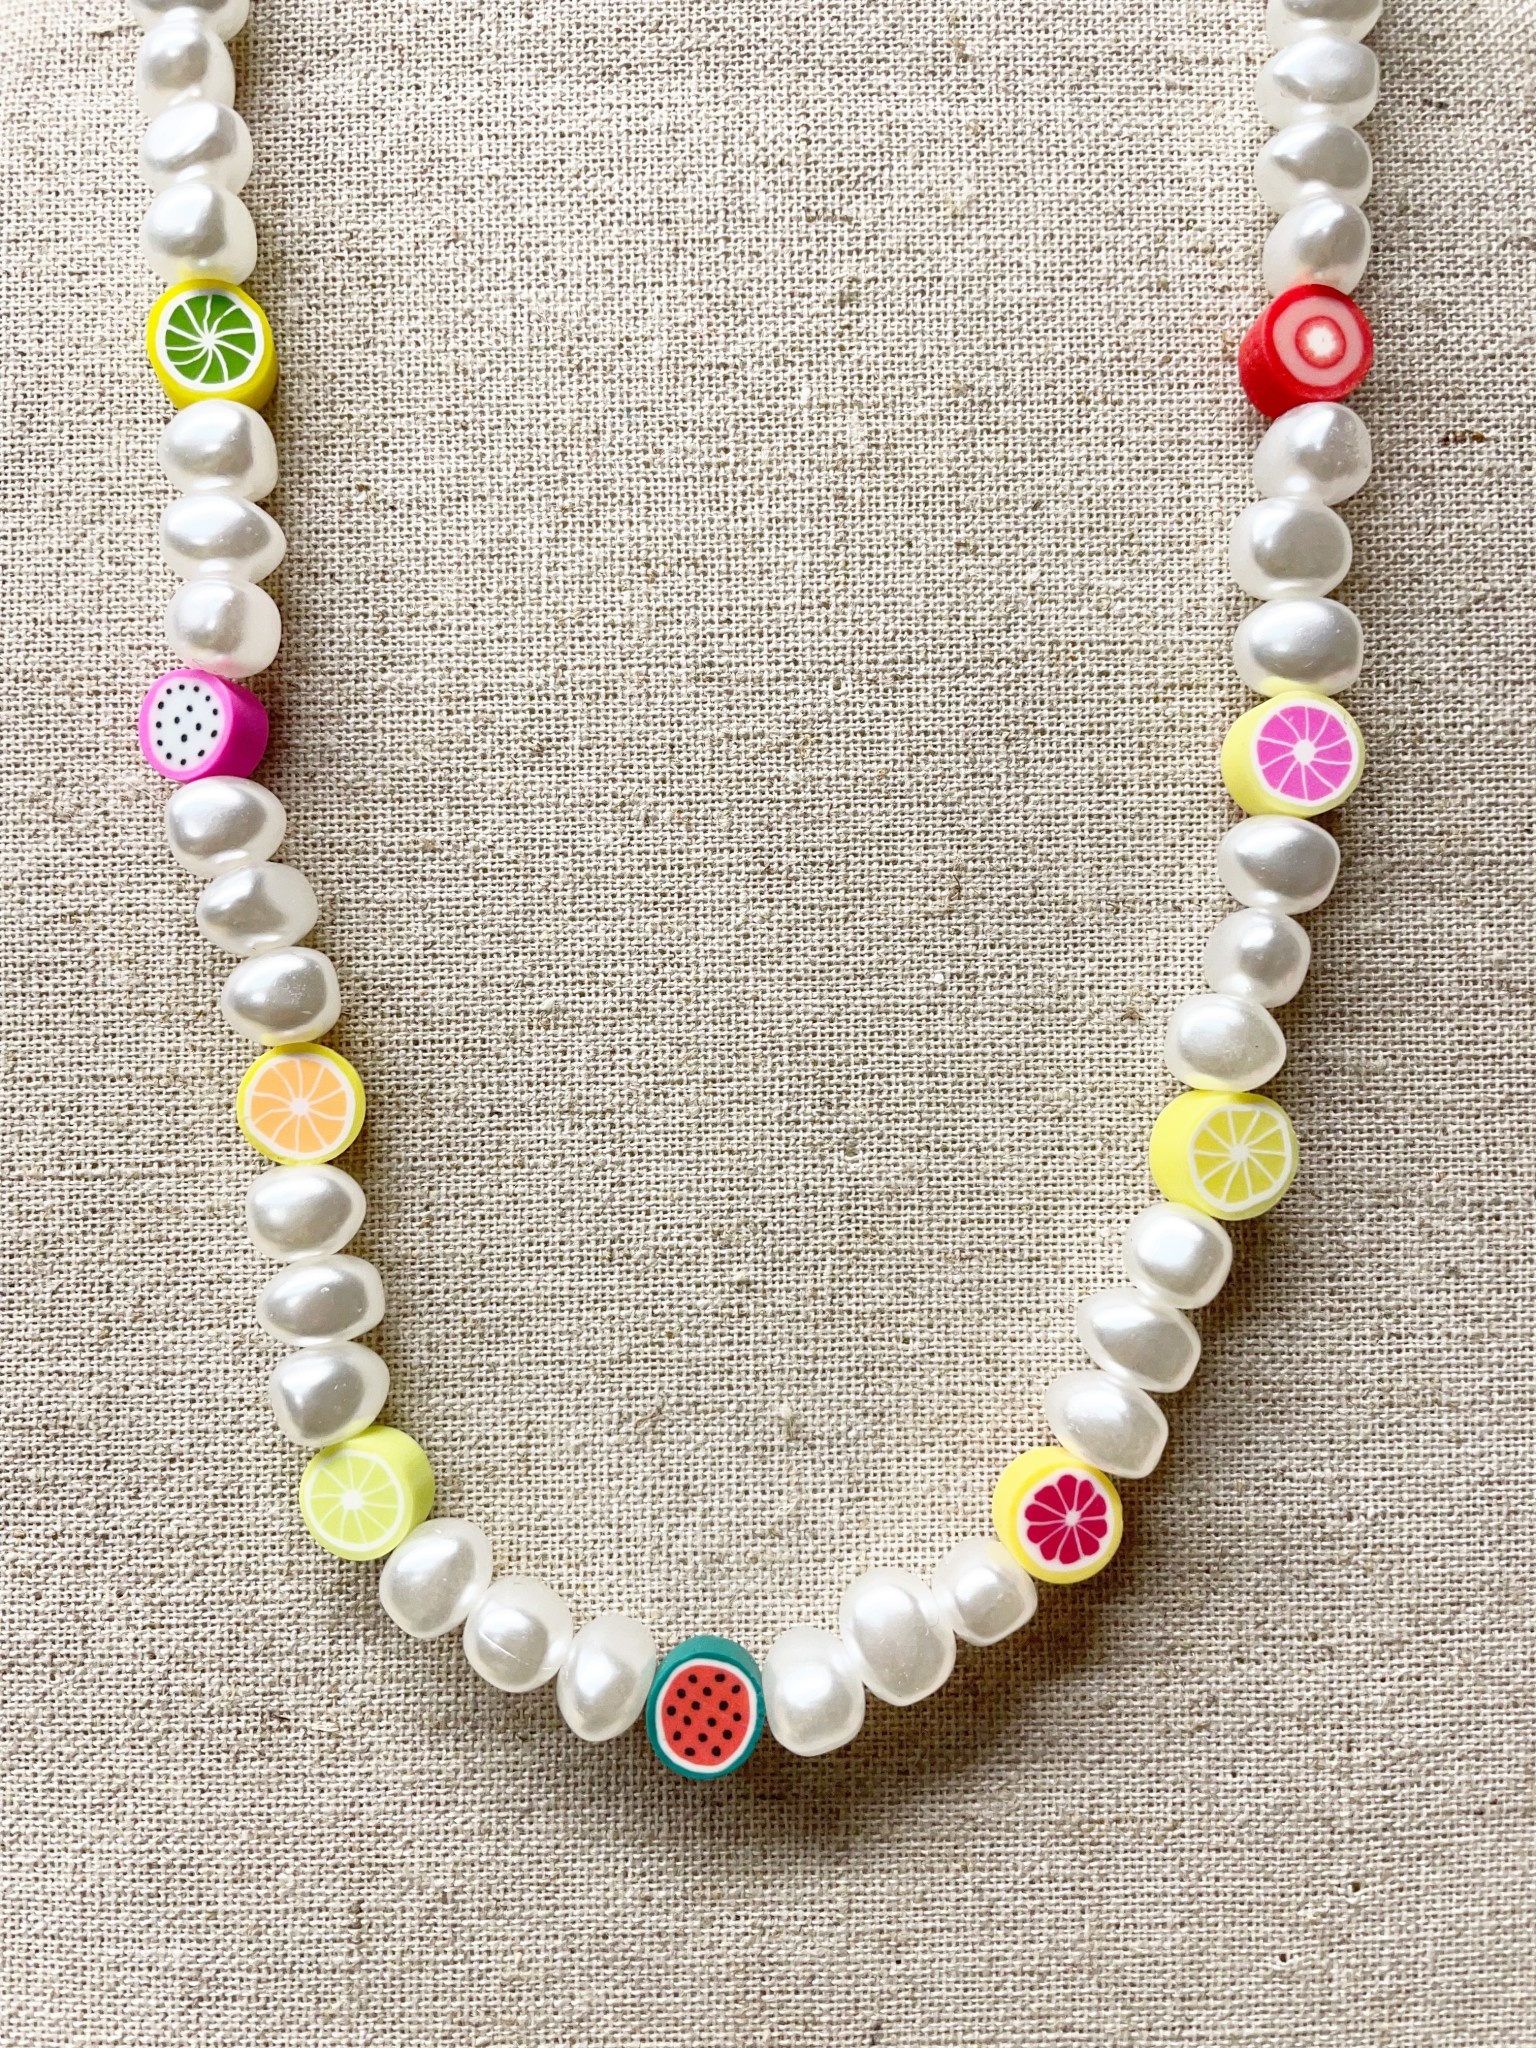 available at m. lynne designs Pearl with Fruit Slices Necklace